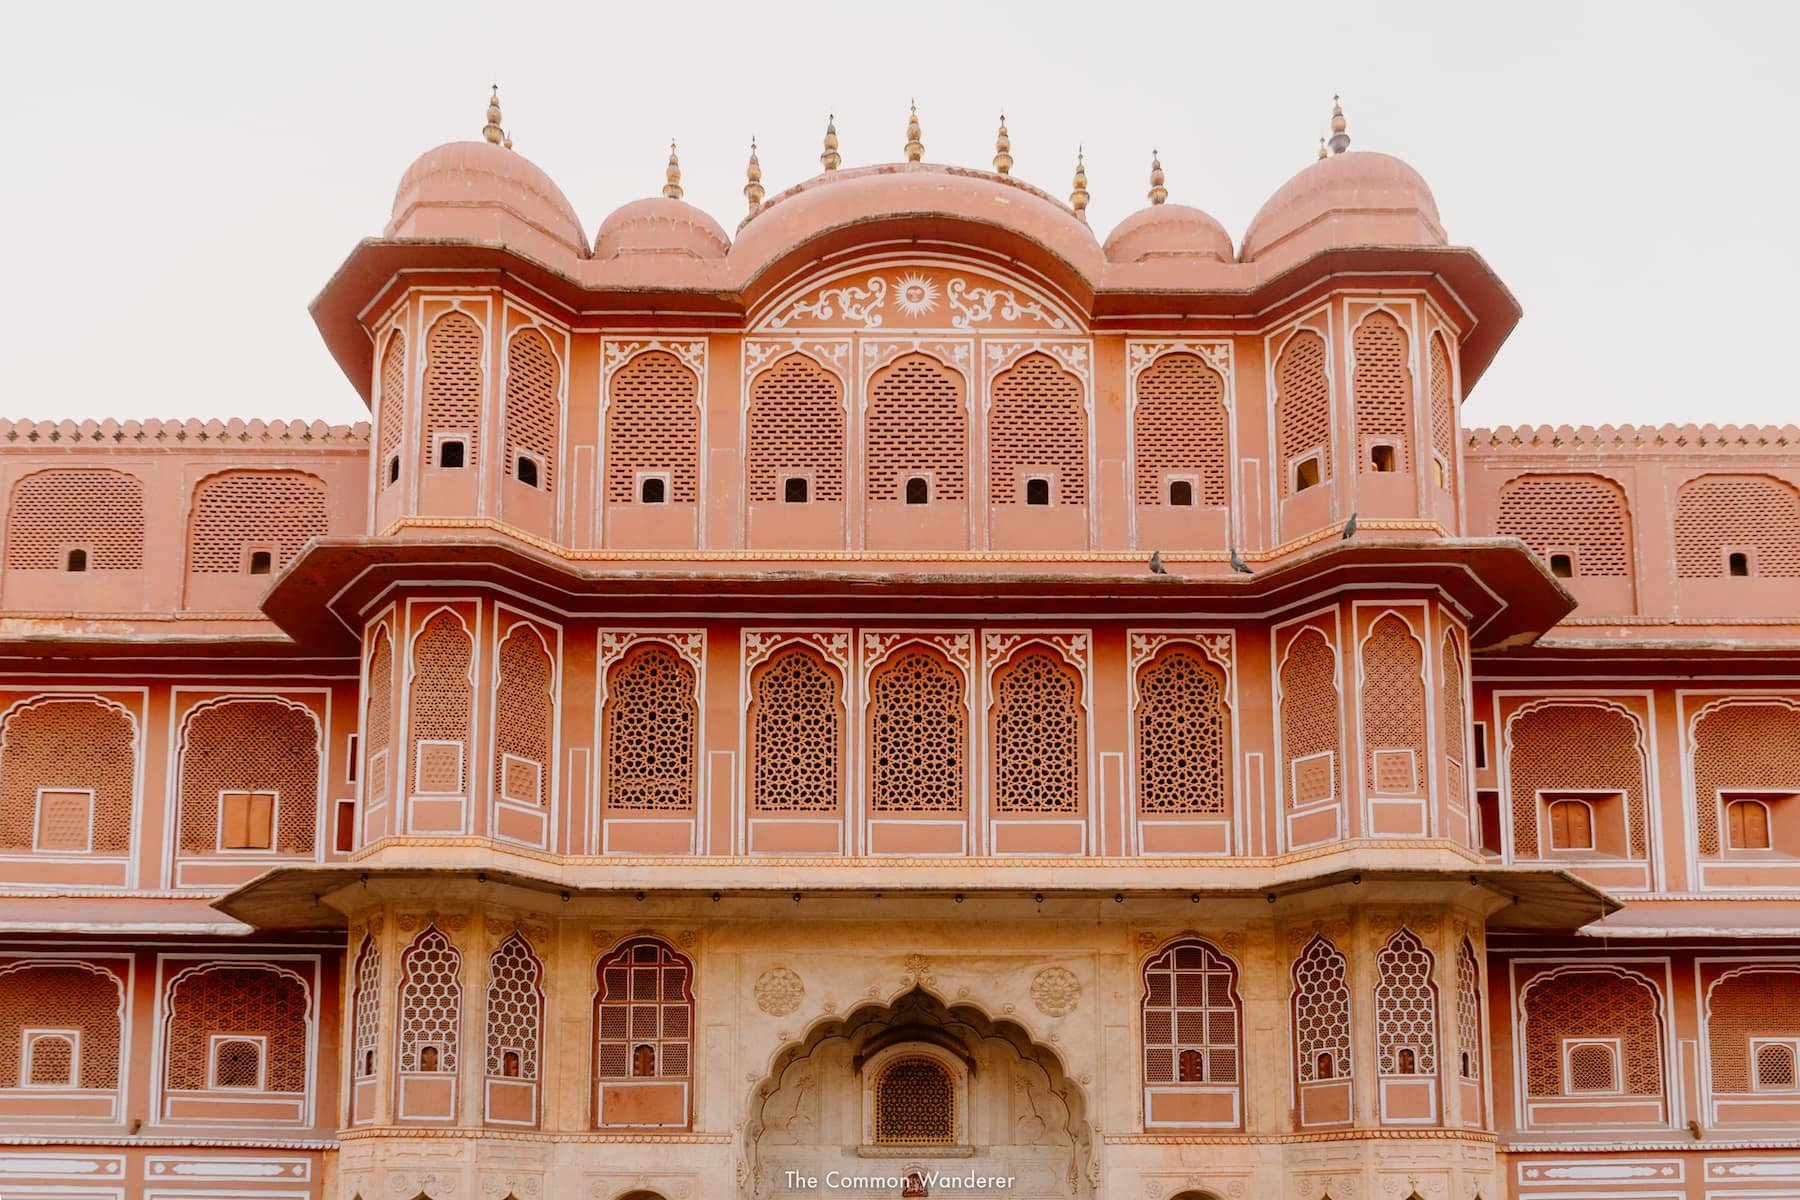 Golden Triangle Majesty - An Expedition through Delhi, Agra and Jaipur